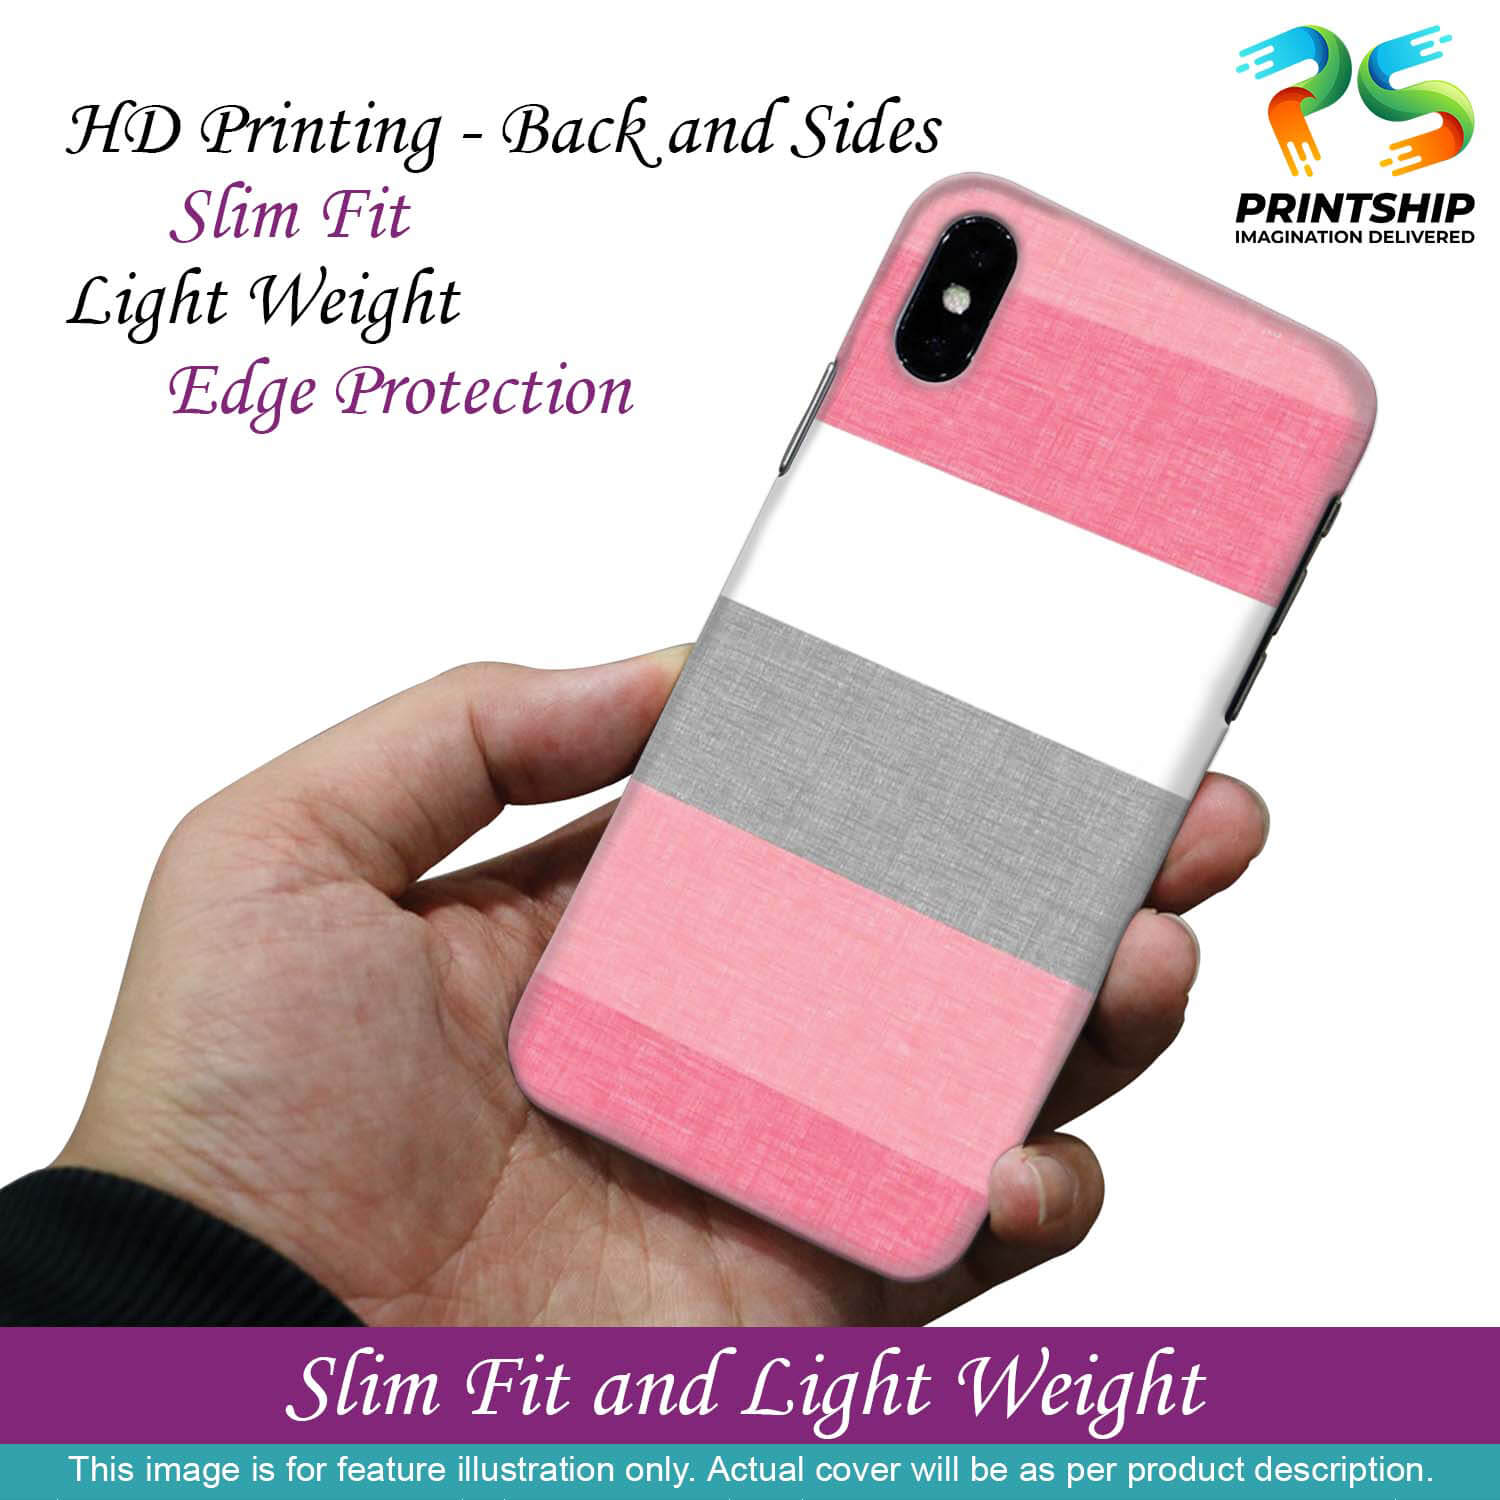 PS1314-Pinky Premium Pattern Back Cover for Oppo F5 Plus